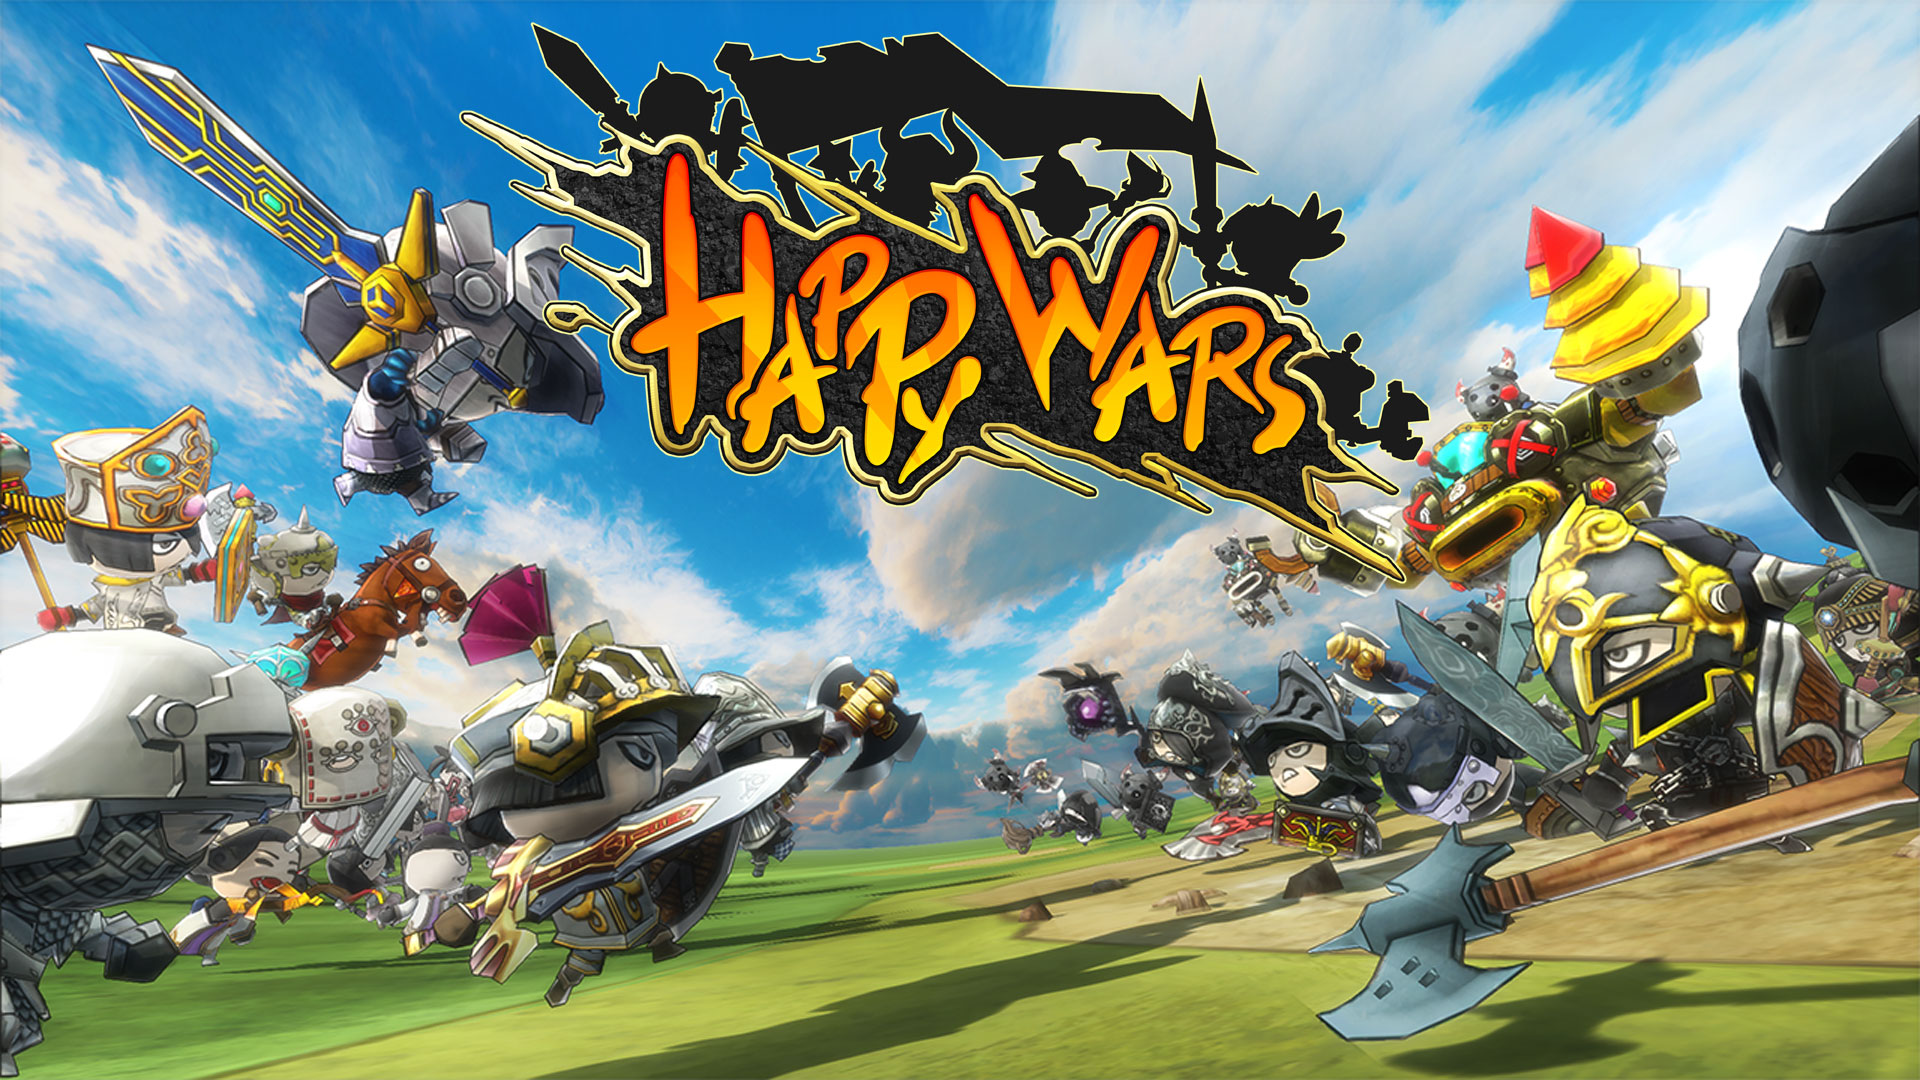 Happy Wars makes Xbox One debut on April 24; Xbox 360 version receives patch